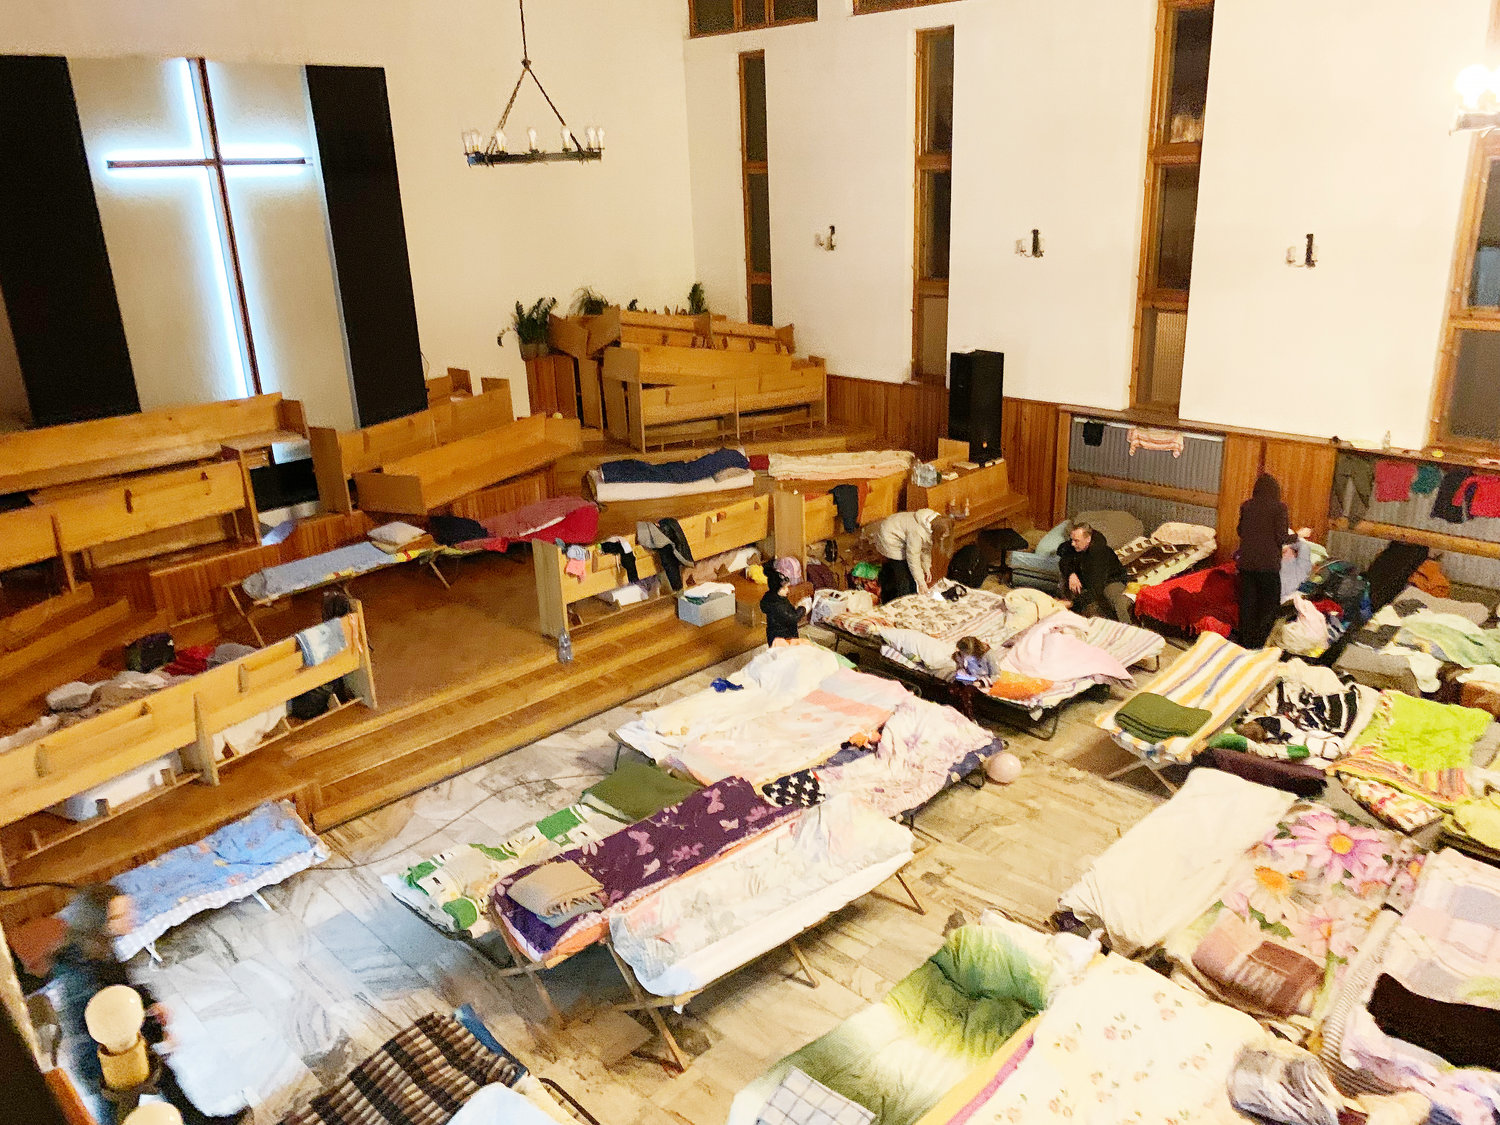 A church in Chelm, Poland after the whole building was converted into a refugee center.